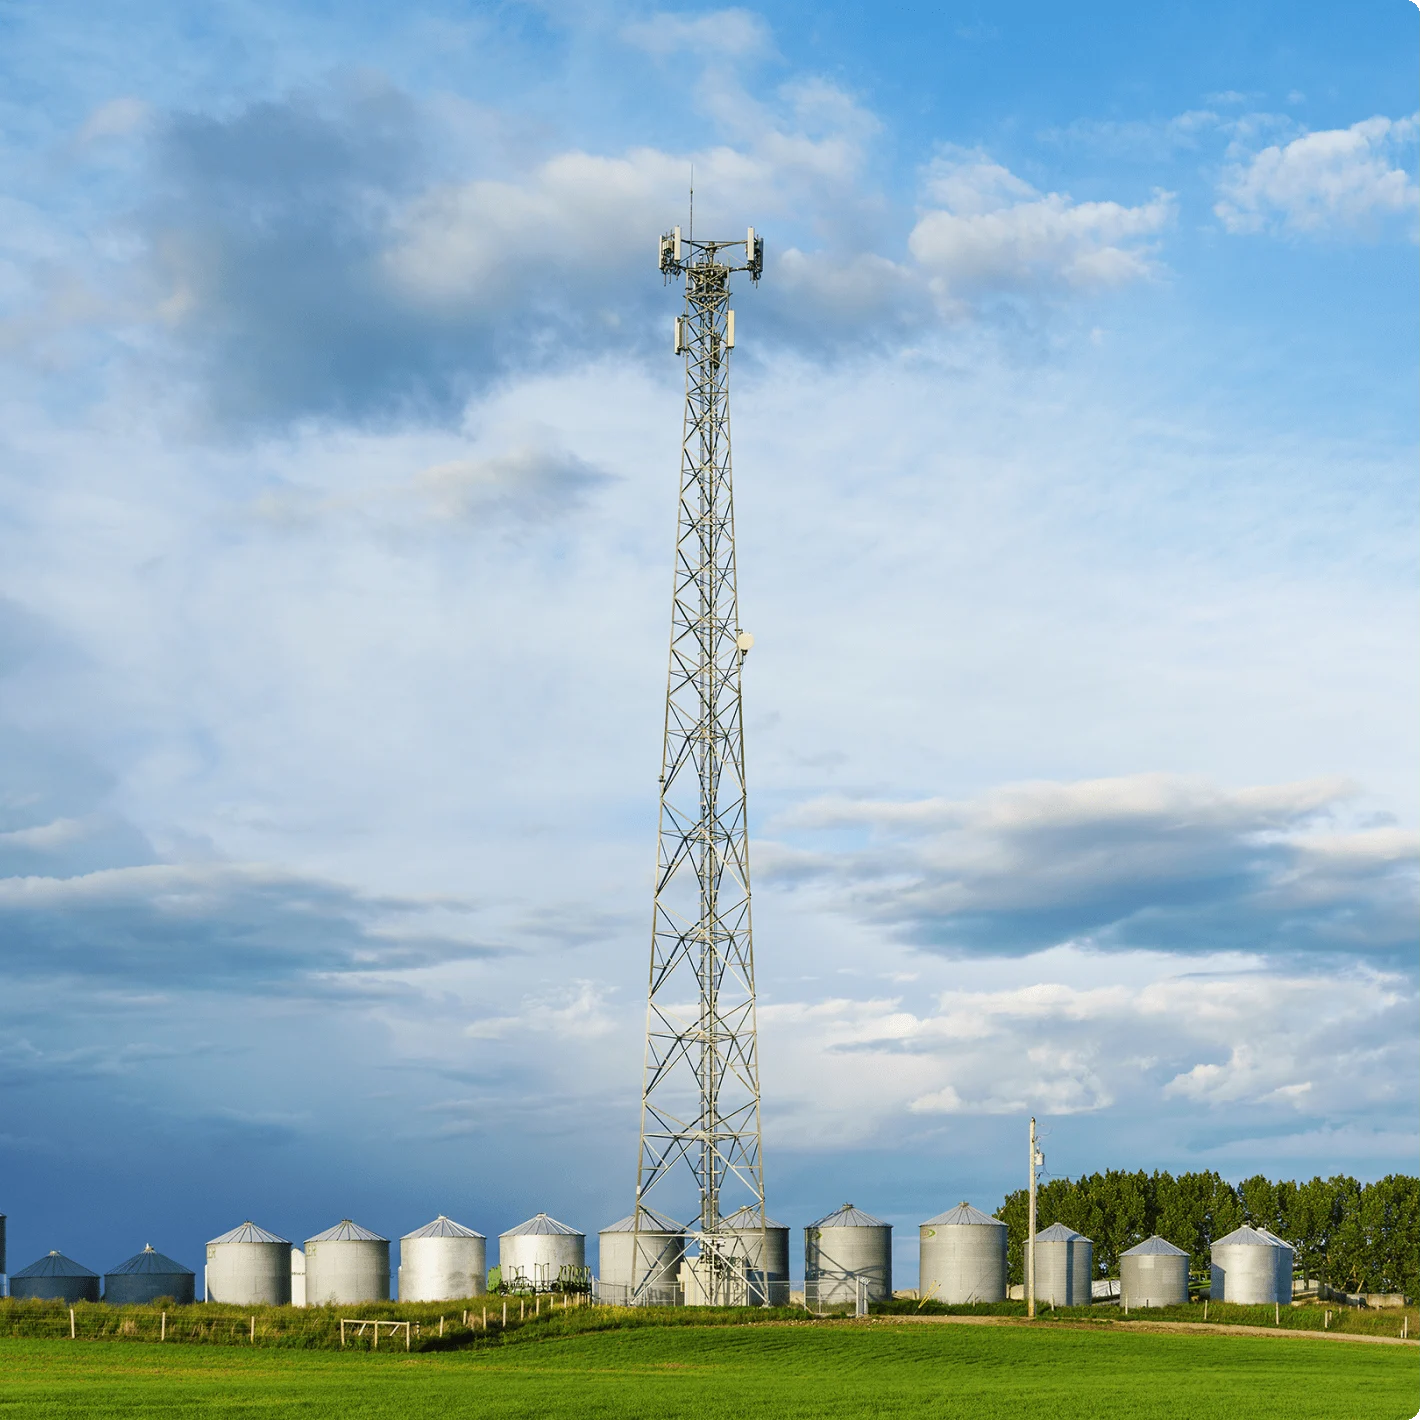 A cellular tower in a field with a line of grain storage bins at its base